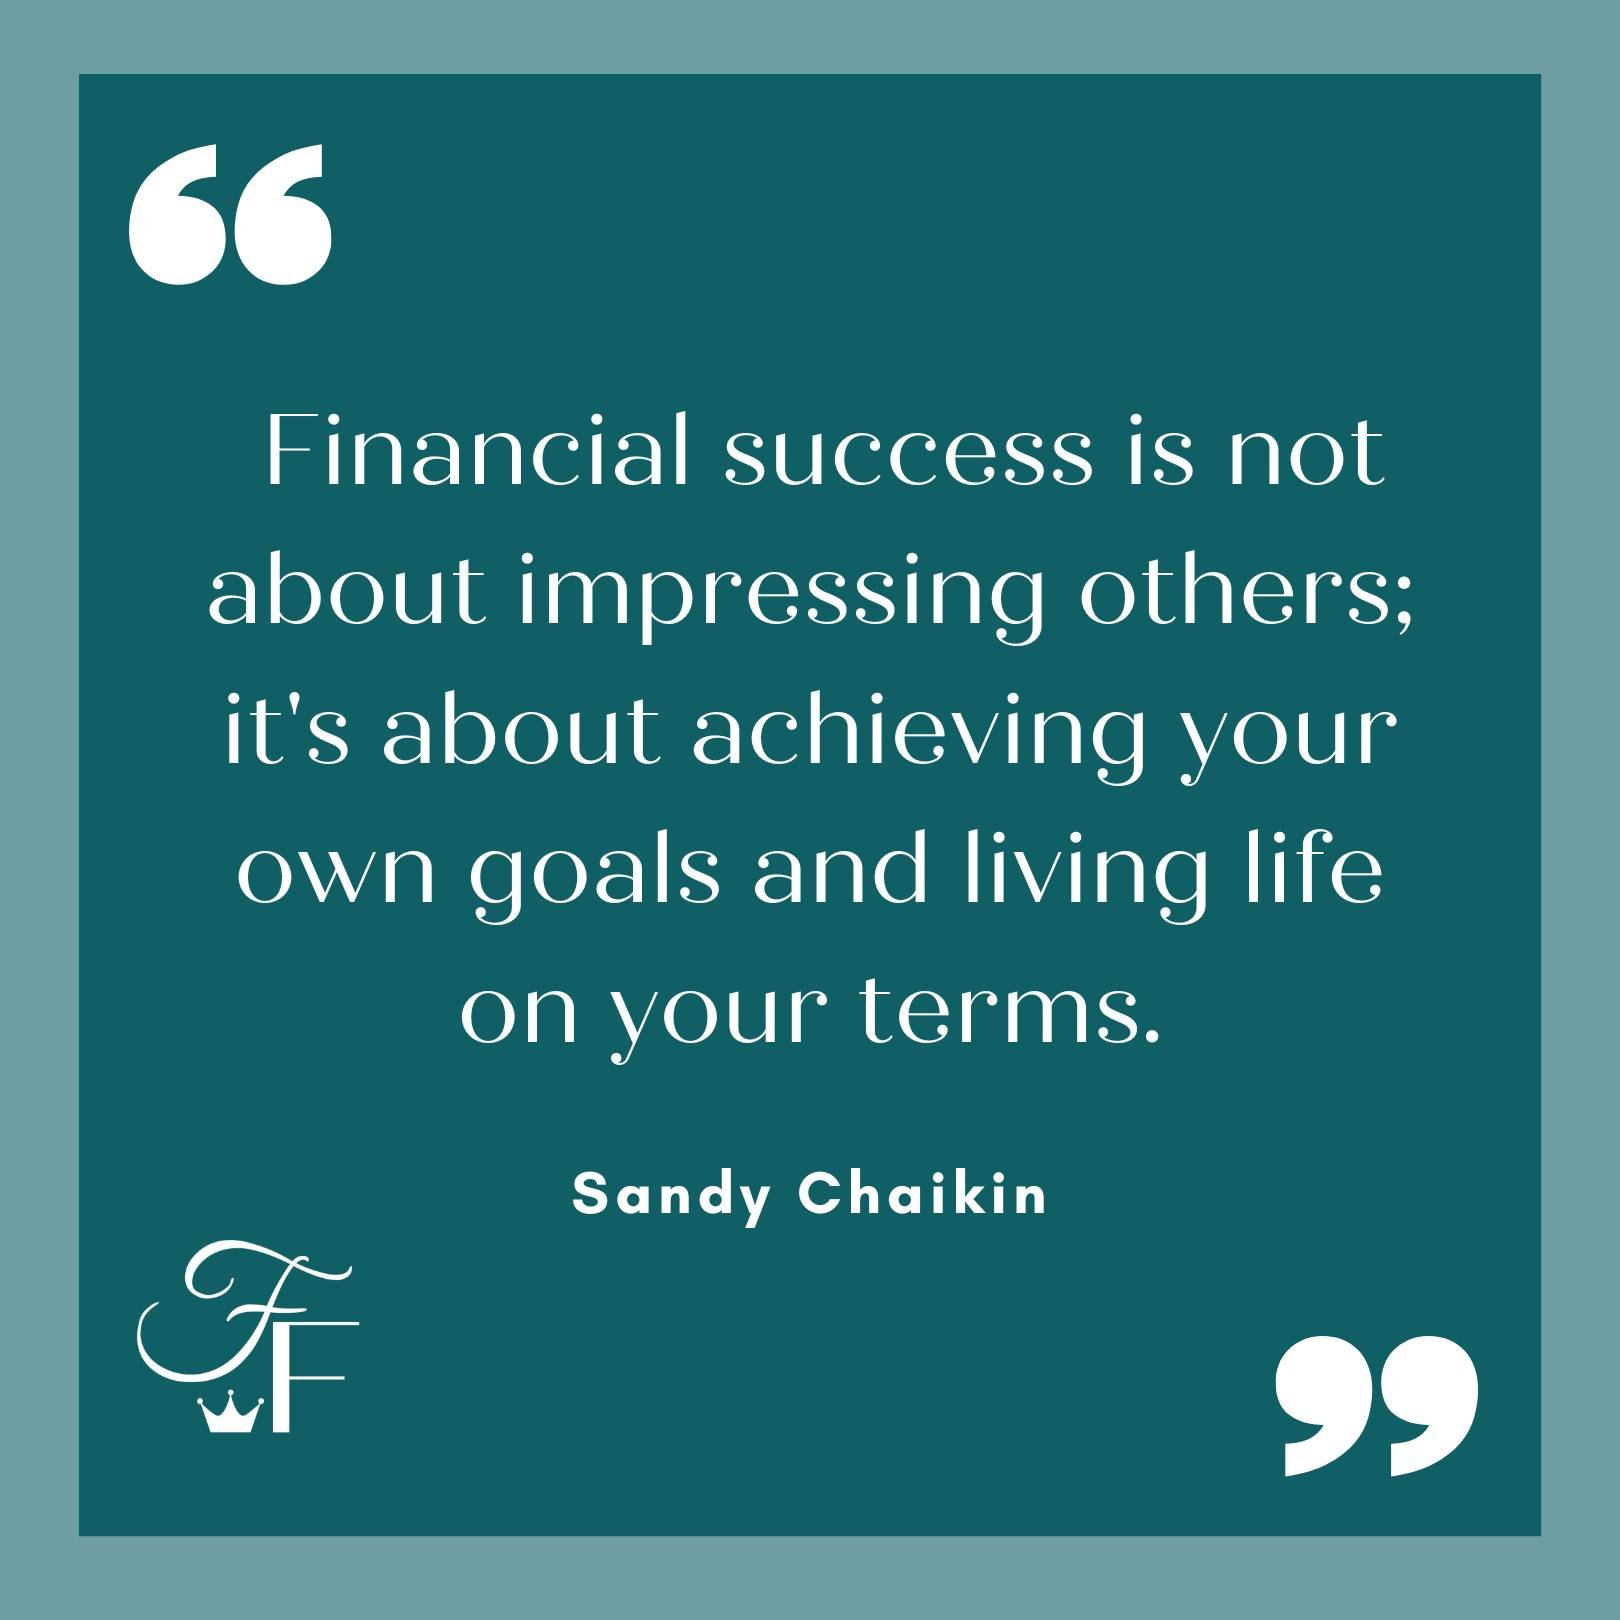 Wise words to redefine success: 'Financial success is not about impressing others; it's about achieving your own goals and living life on your terms.' - Sandy Chaikin. At Fyvie Financial, we're here to guide you toward your unique financial goals bec